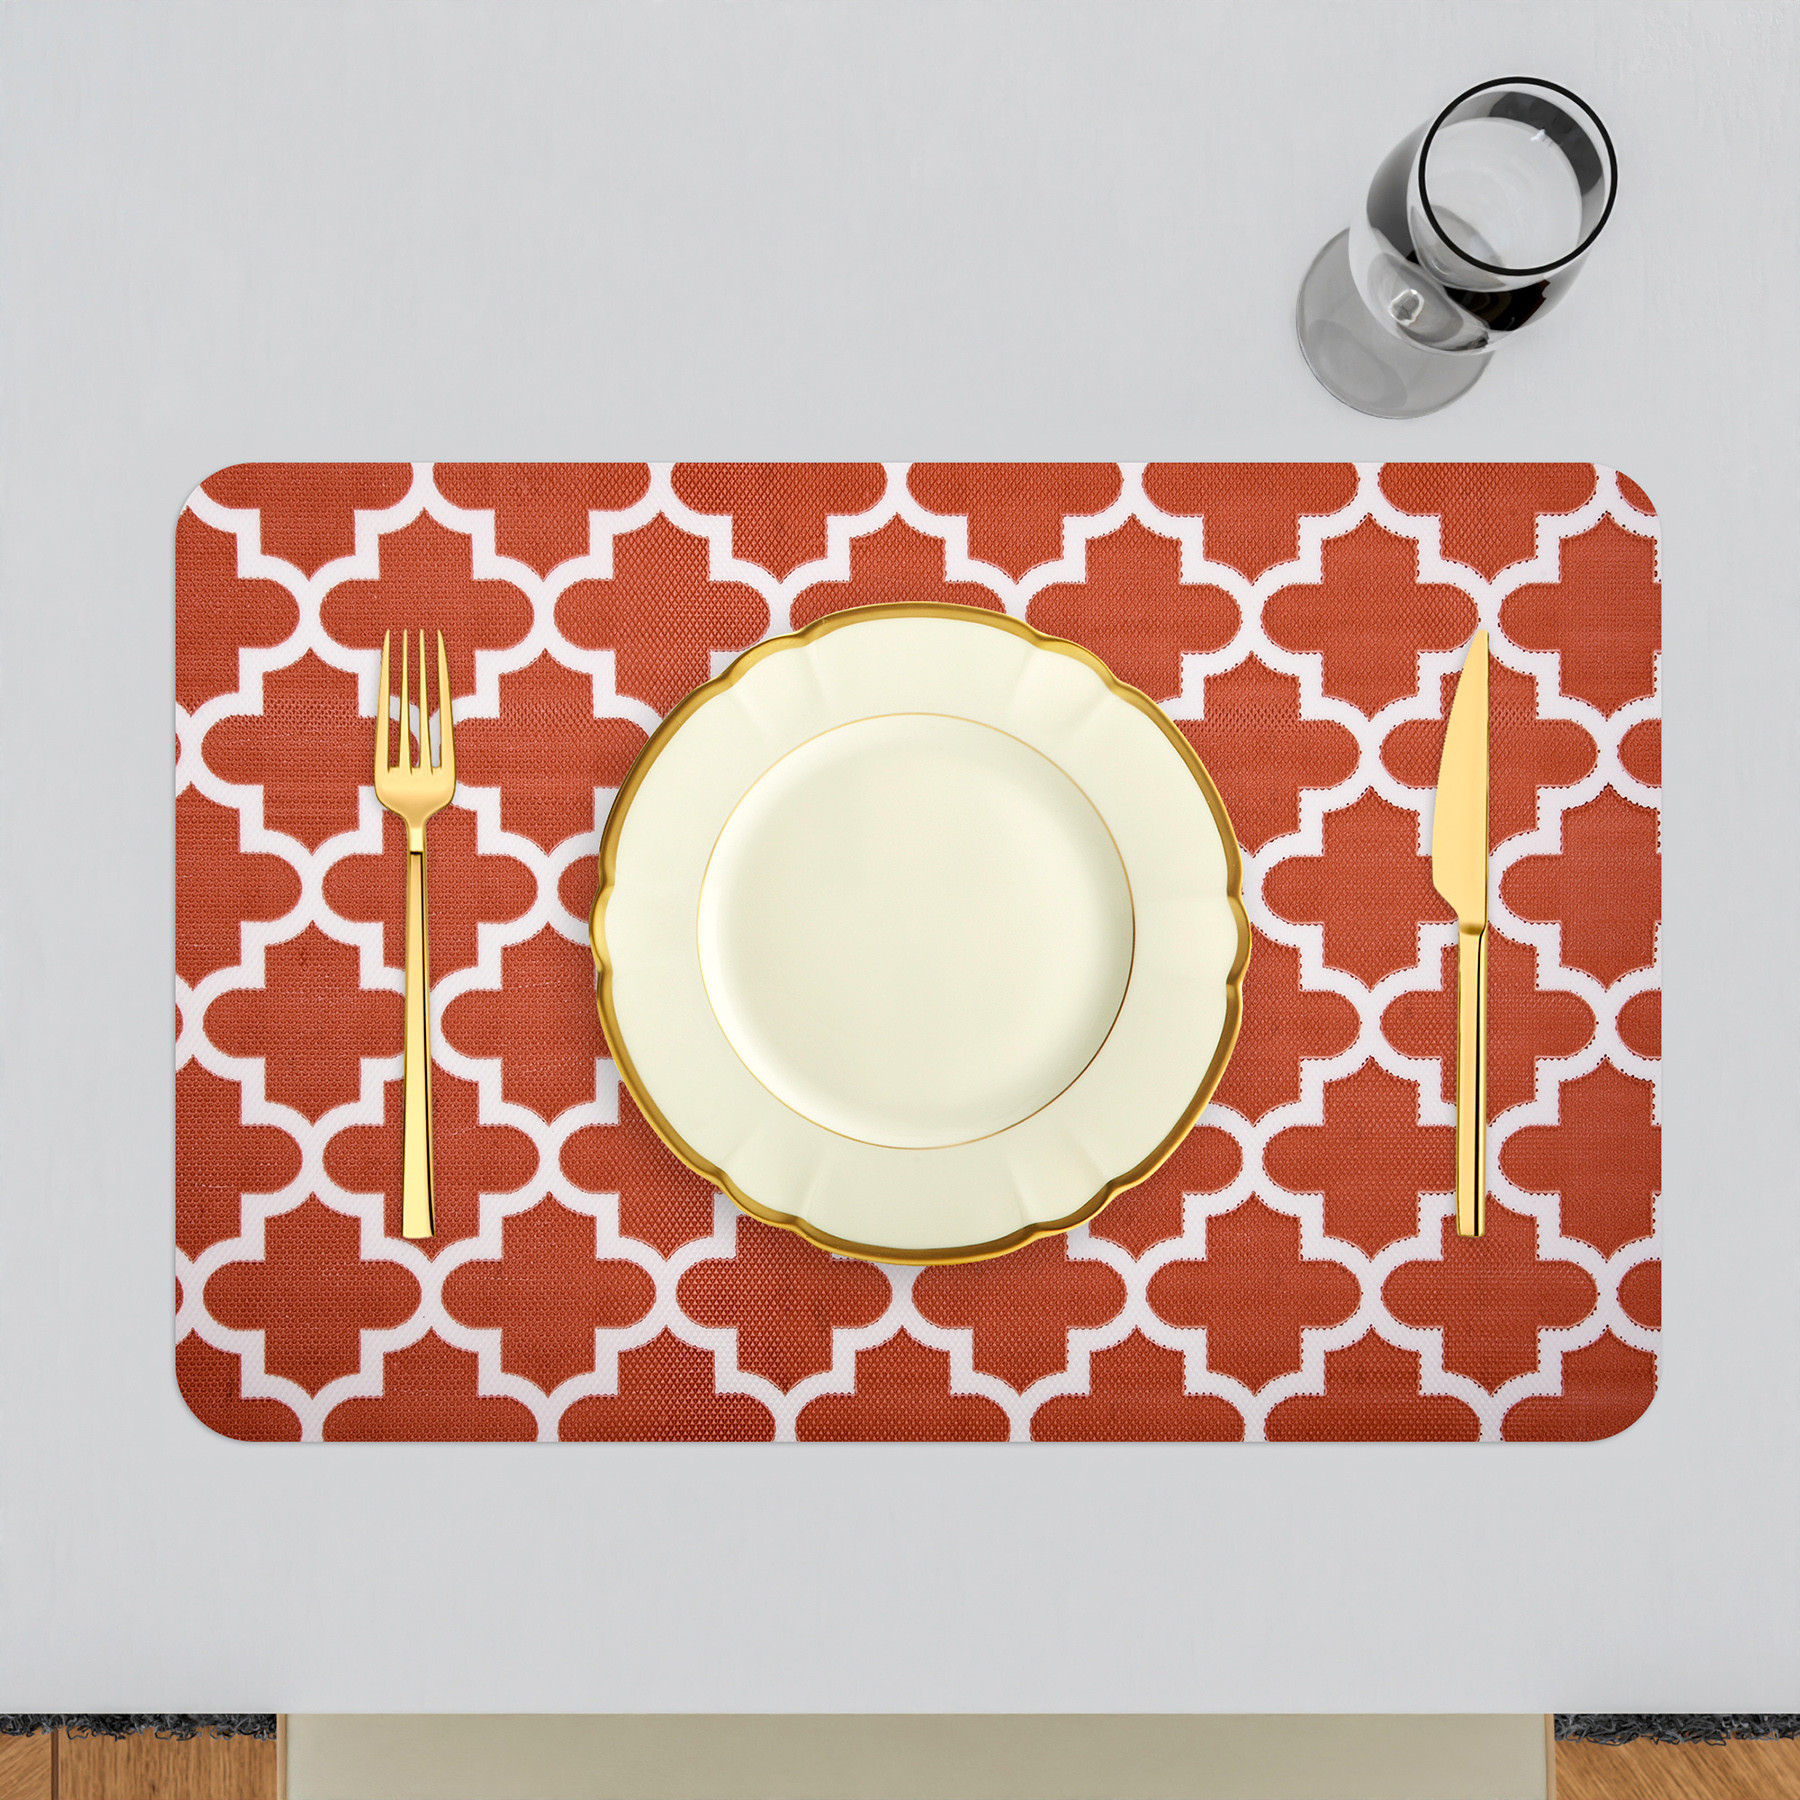 Kuber Industries Placemat | Placemats for Dining Room | Anti-Slip Table Mat Set | Placemats for Kitchen Table | Dining Table Placemats | Hexagon-Design Placemat | 6 Piece Set | Red